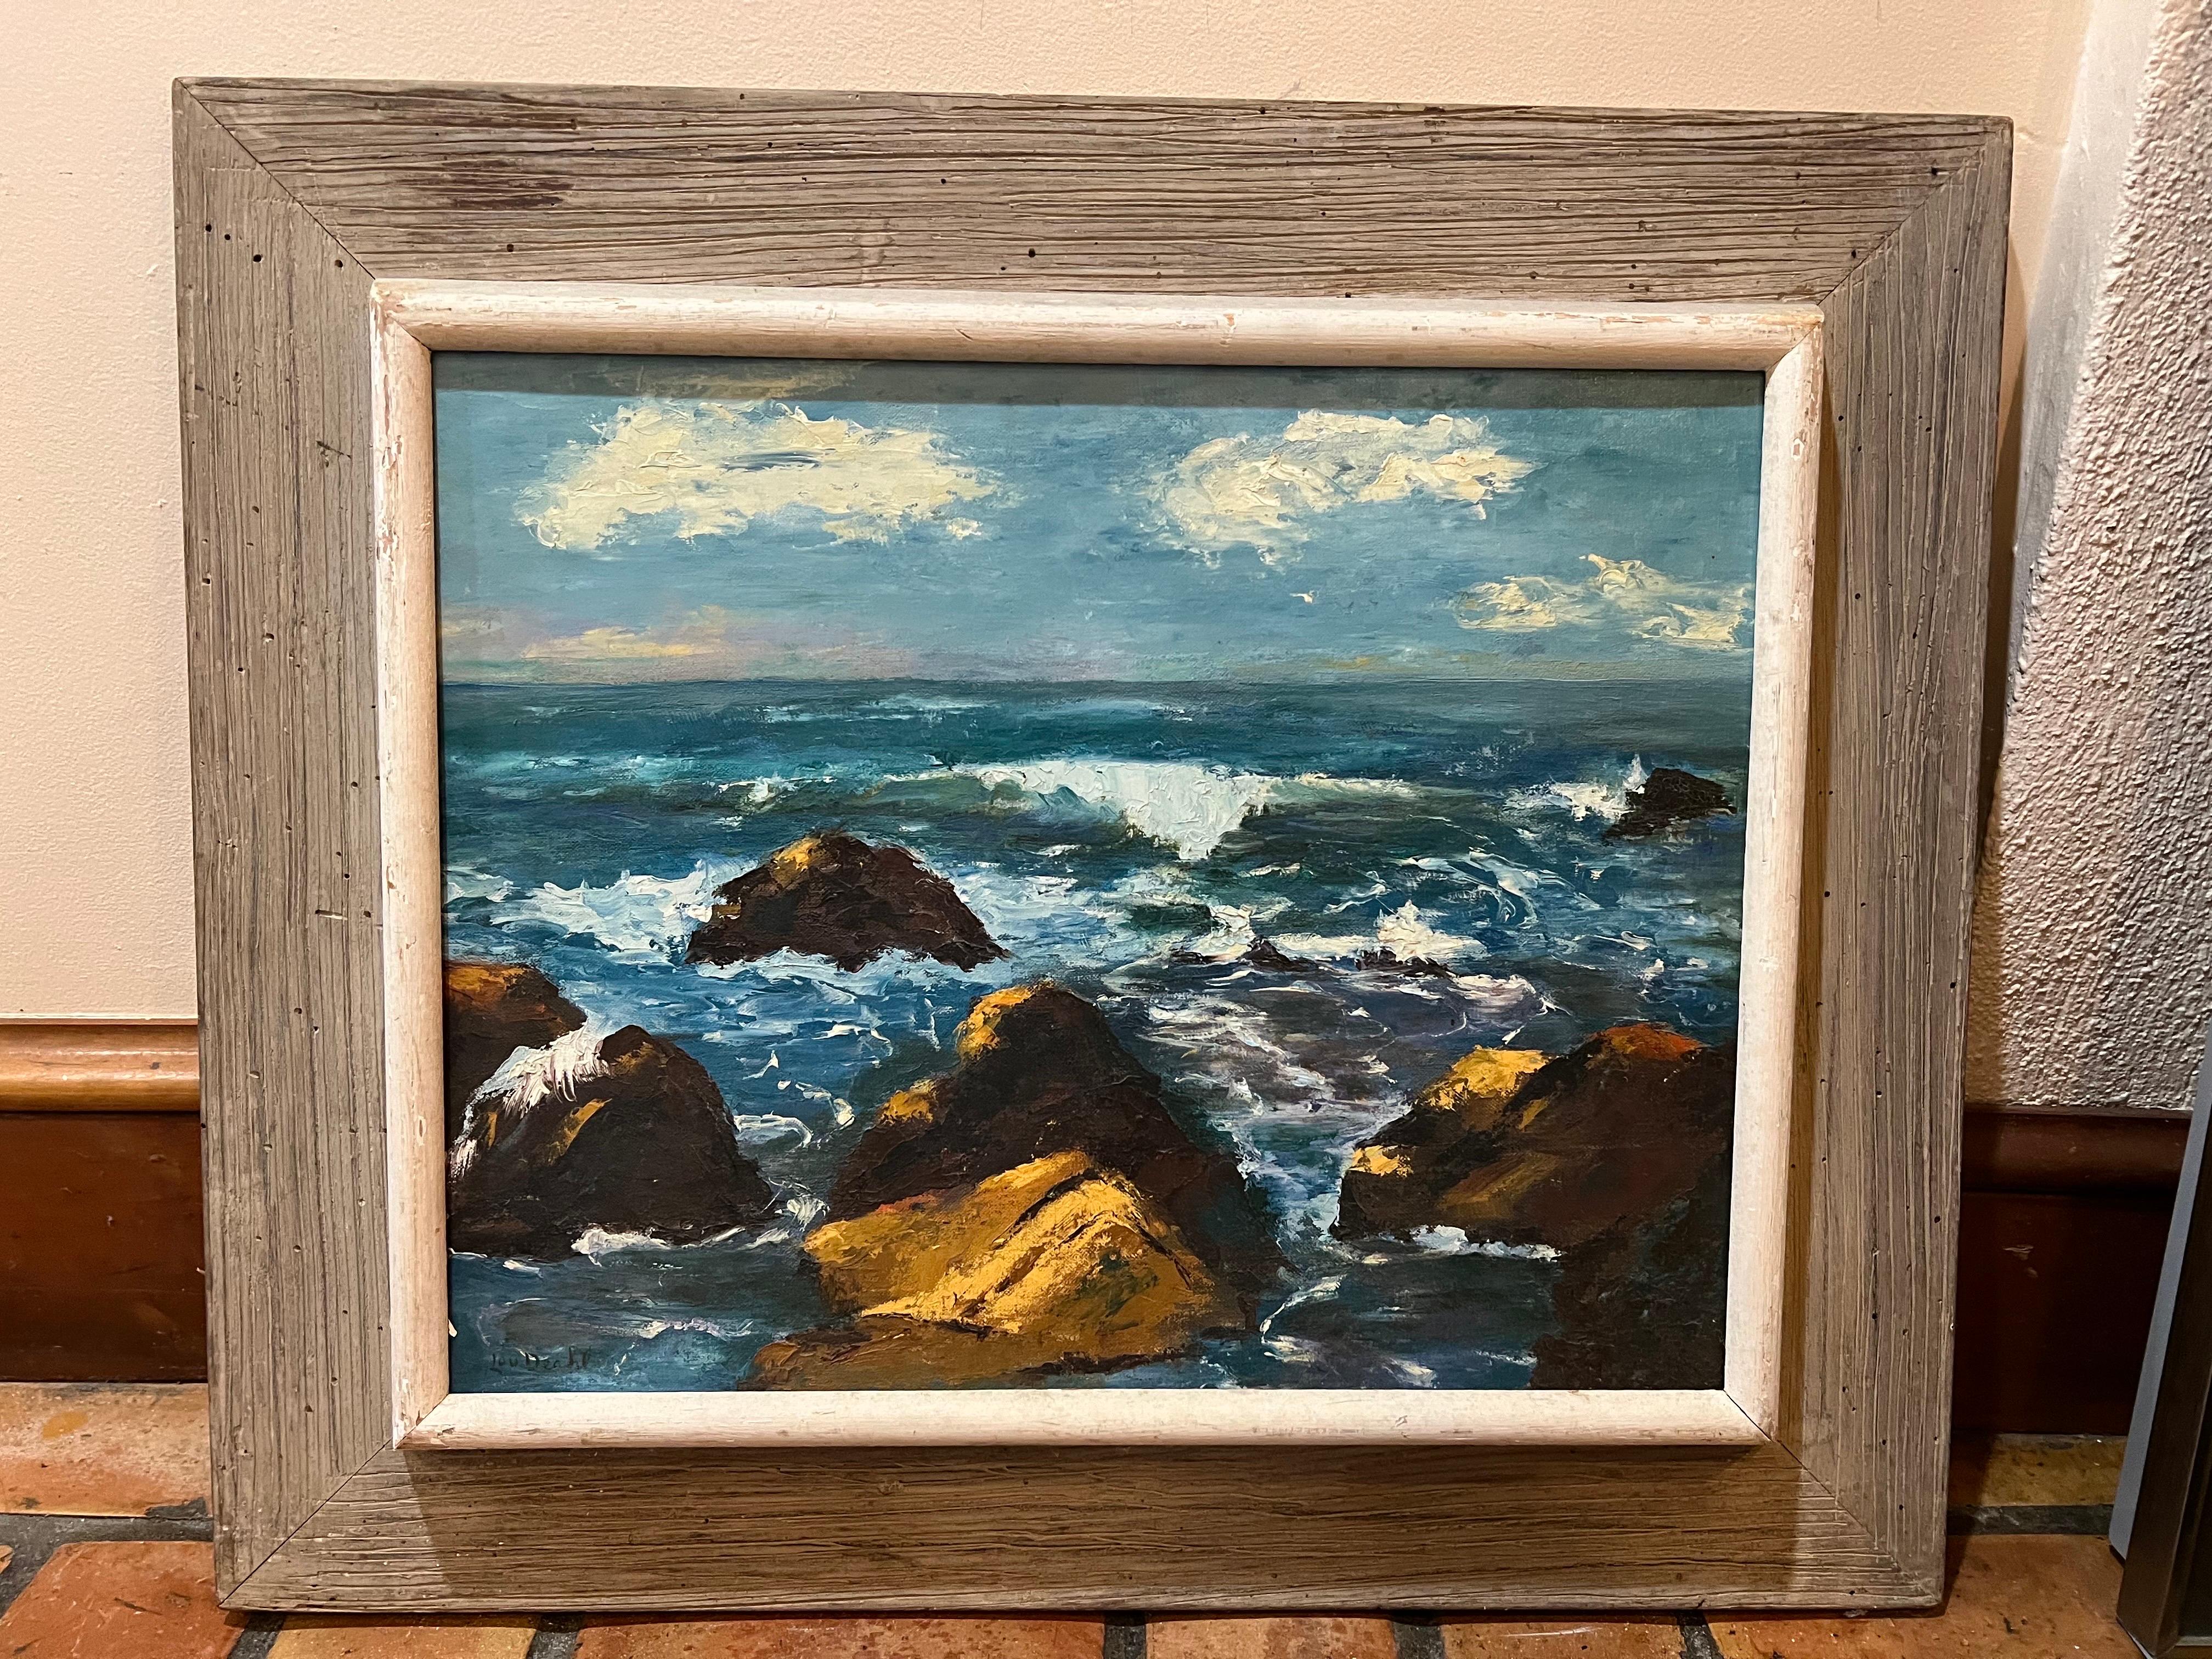 Mid Century Painting of the Ocean. Nice solid wooden frame. Mid century era. Rich blues, golds and whites. This item can ship domestically for $49 parcel.